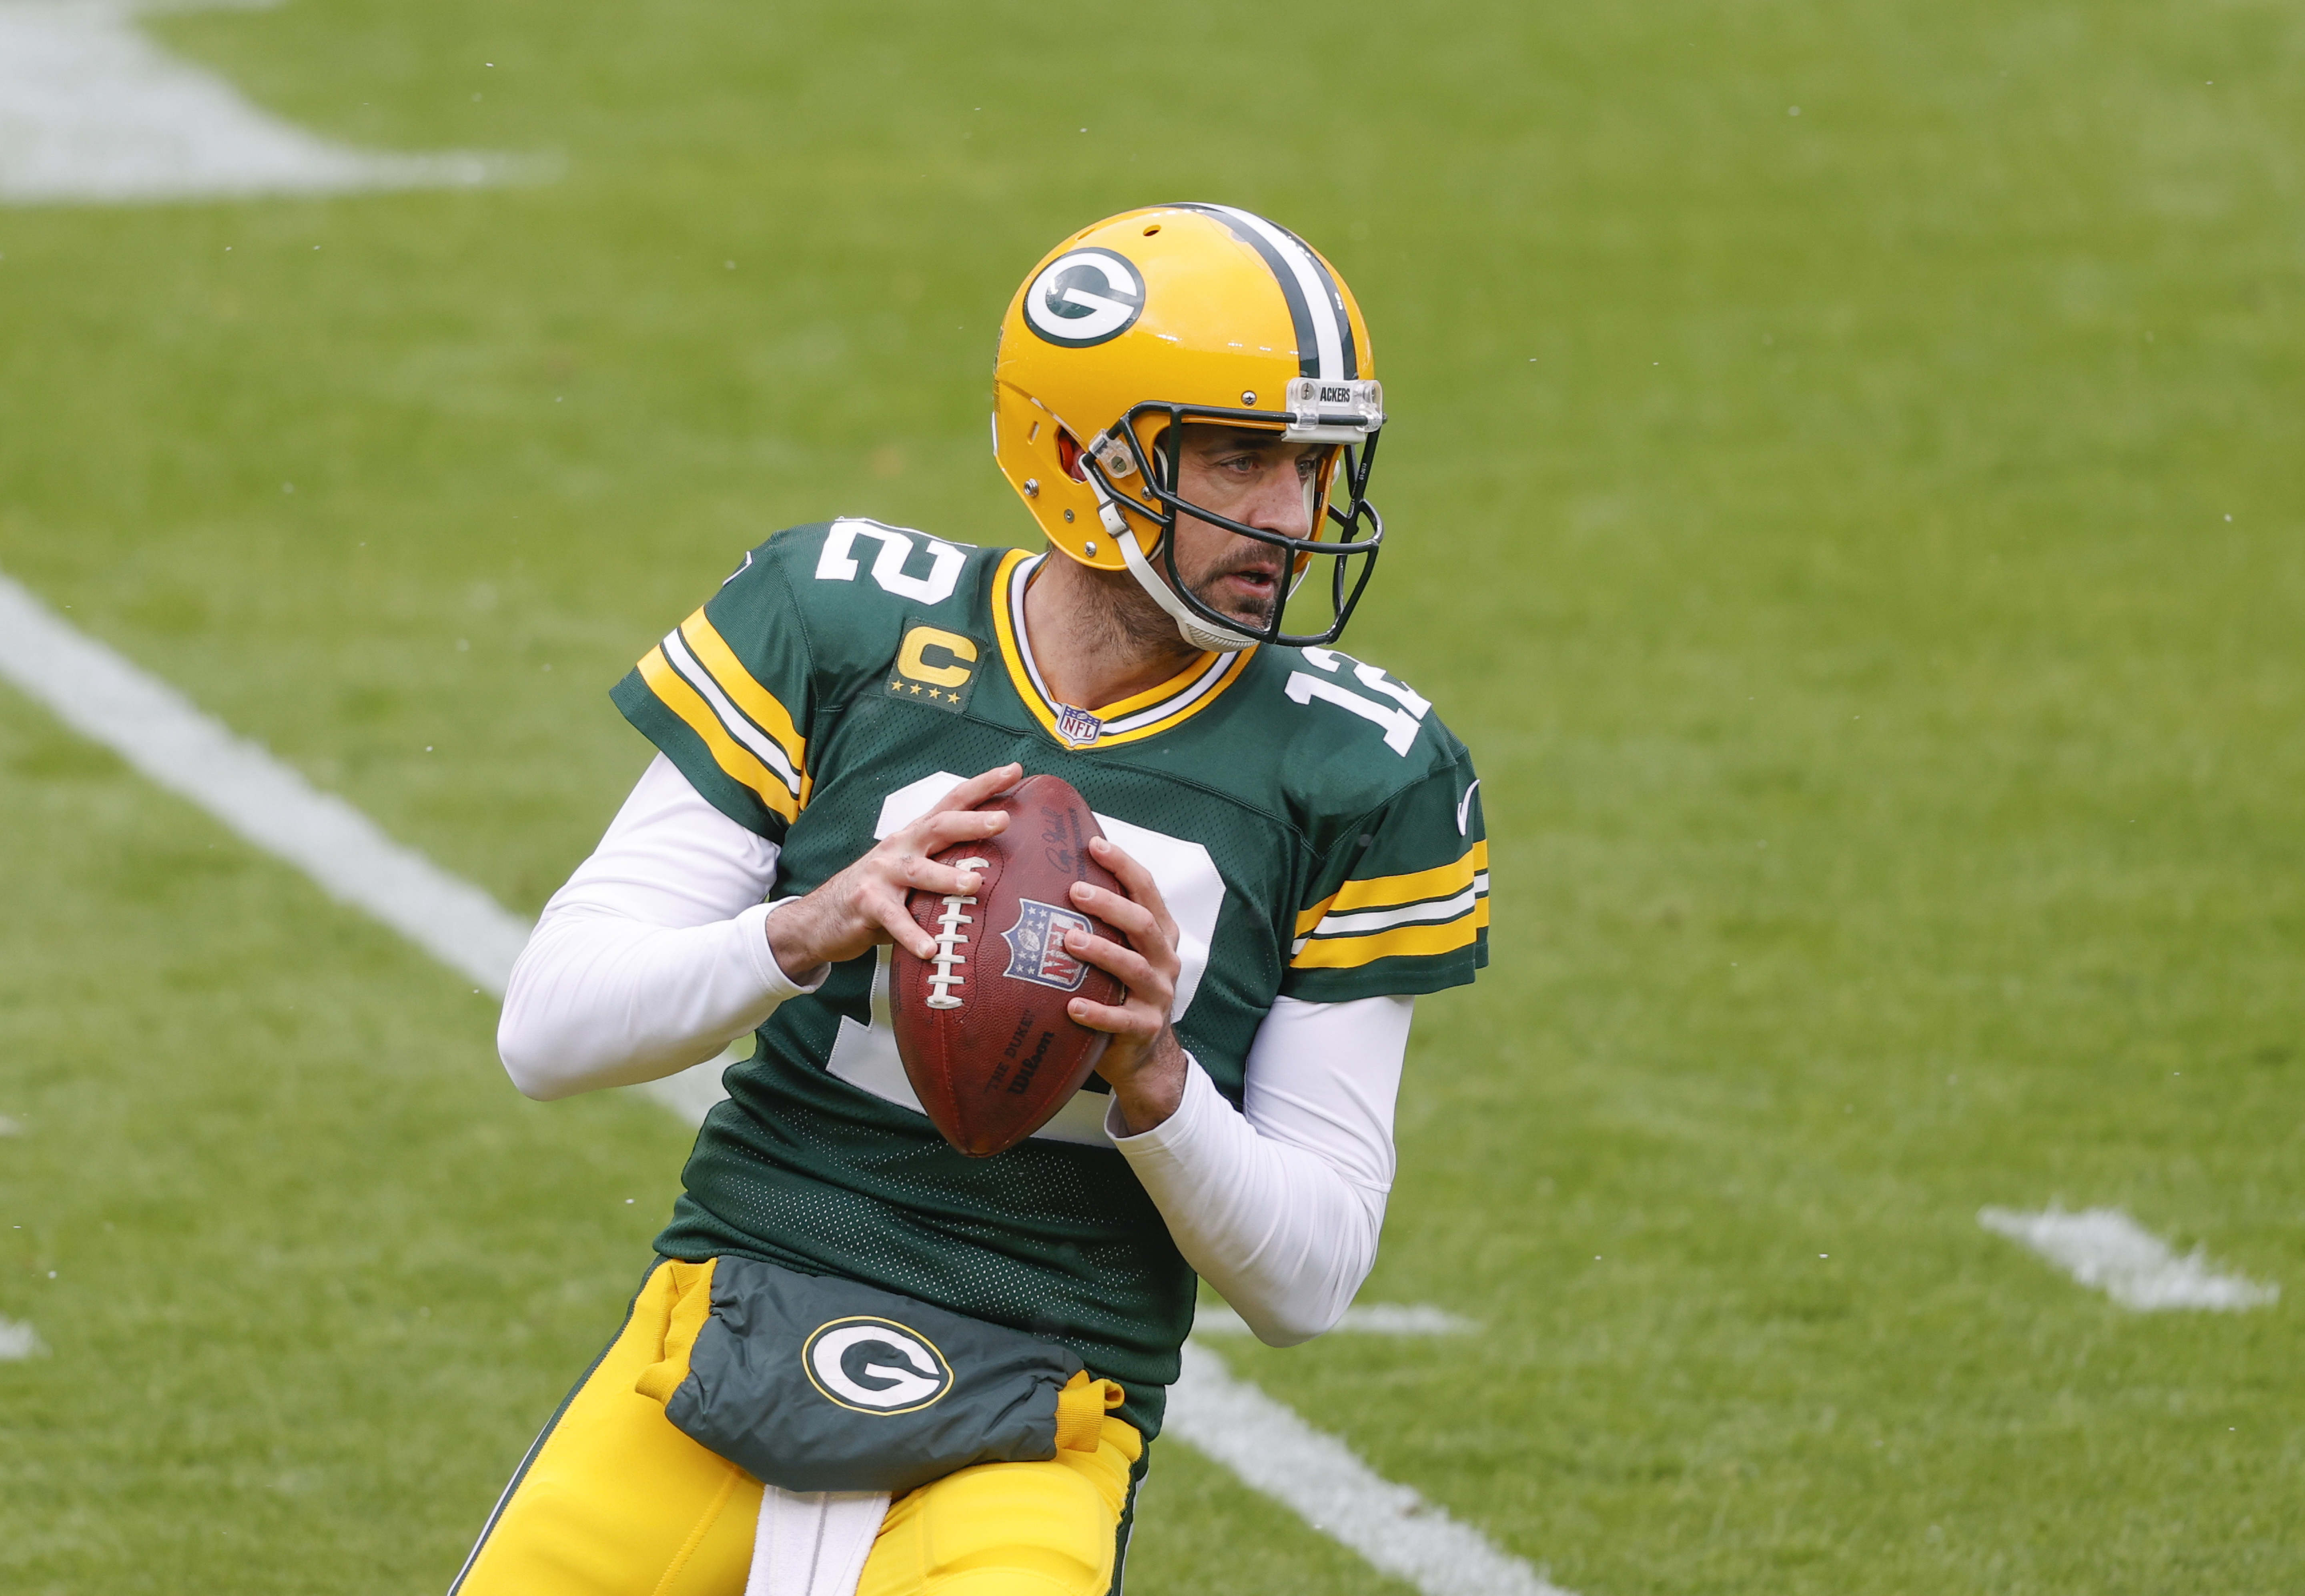 watch packers vs 49ers online